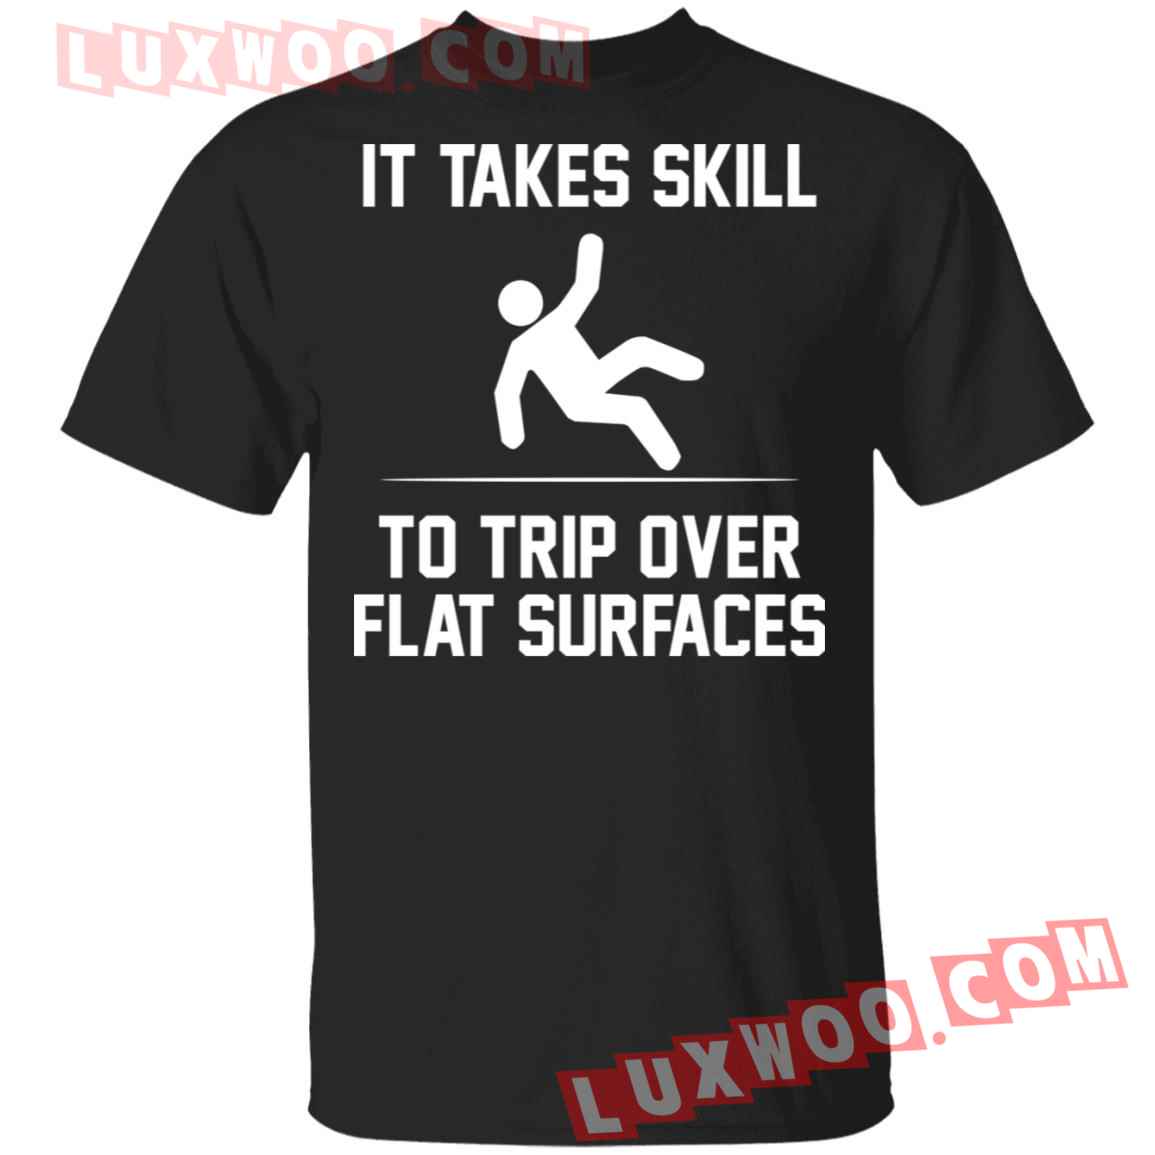 It Takes Skill To Trip Over Flat Surfaces Shirt - Luxwoo.com